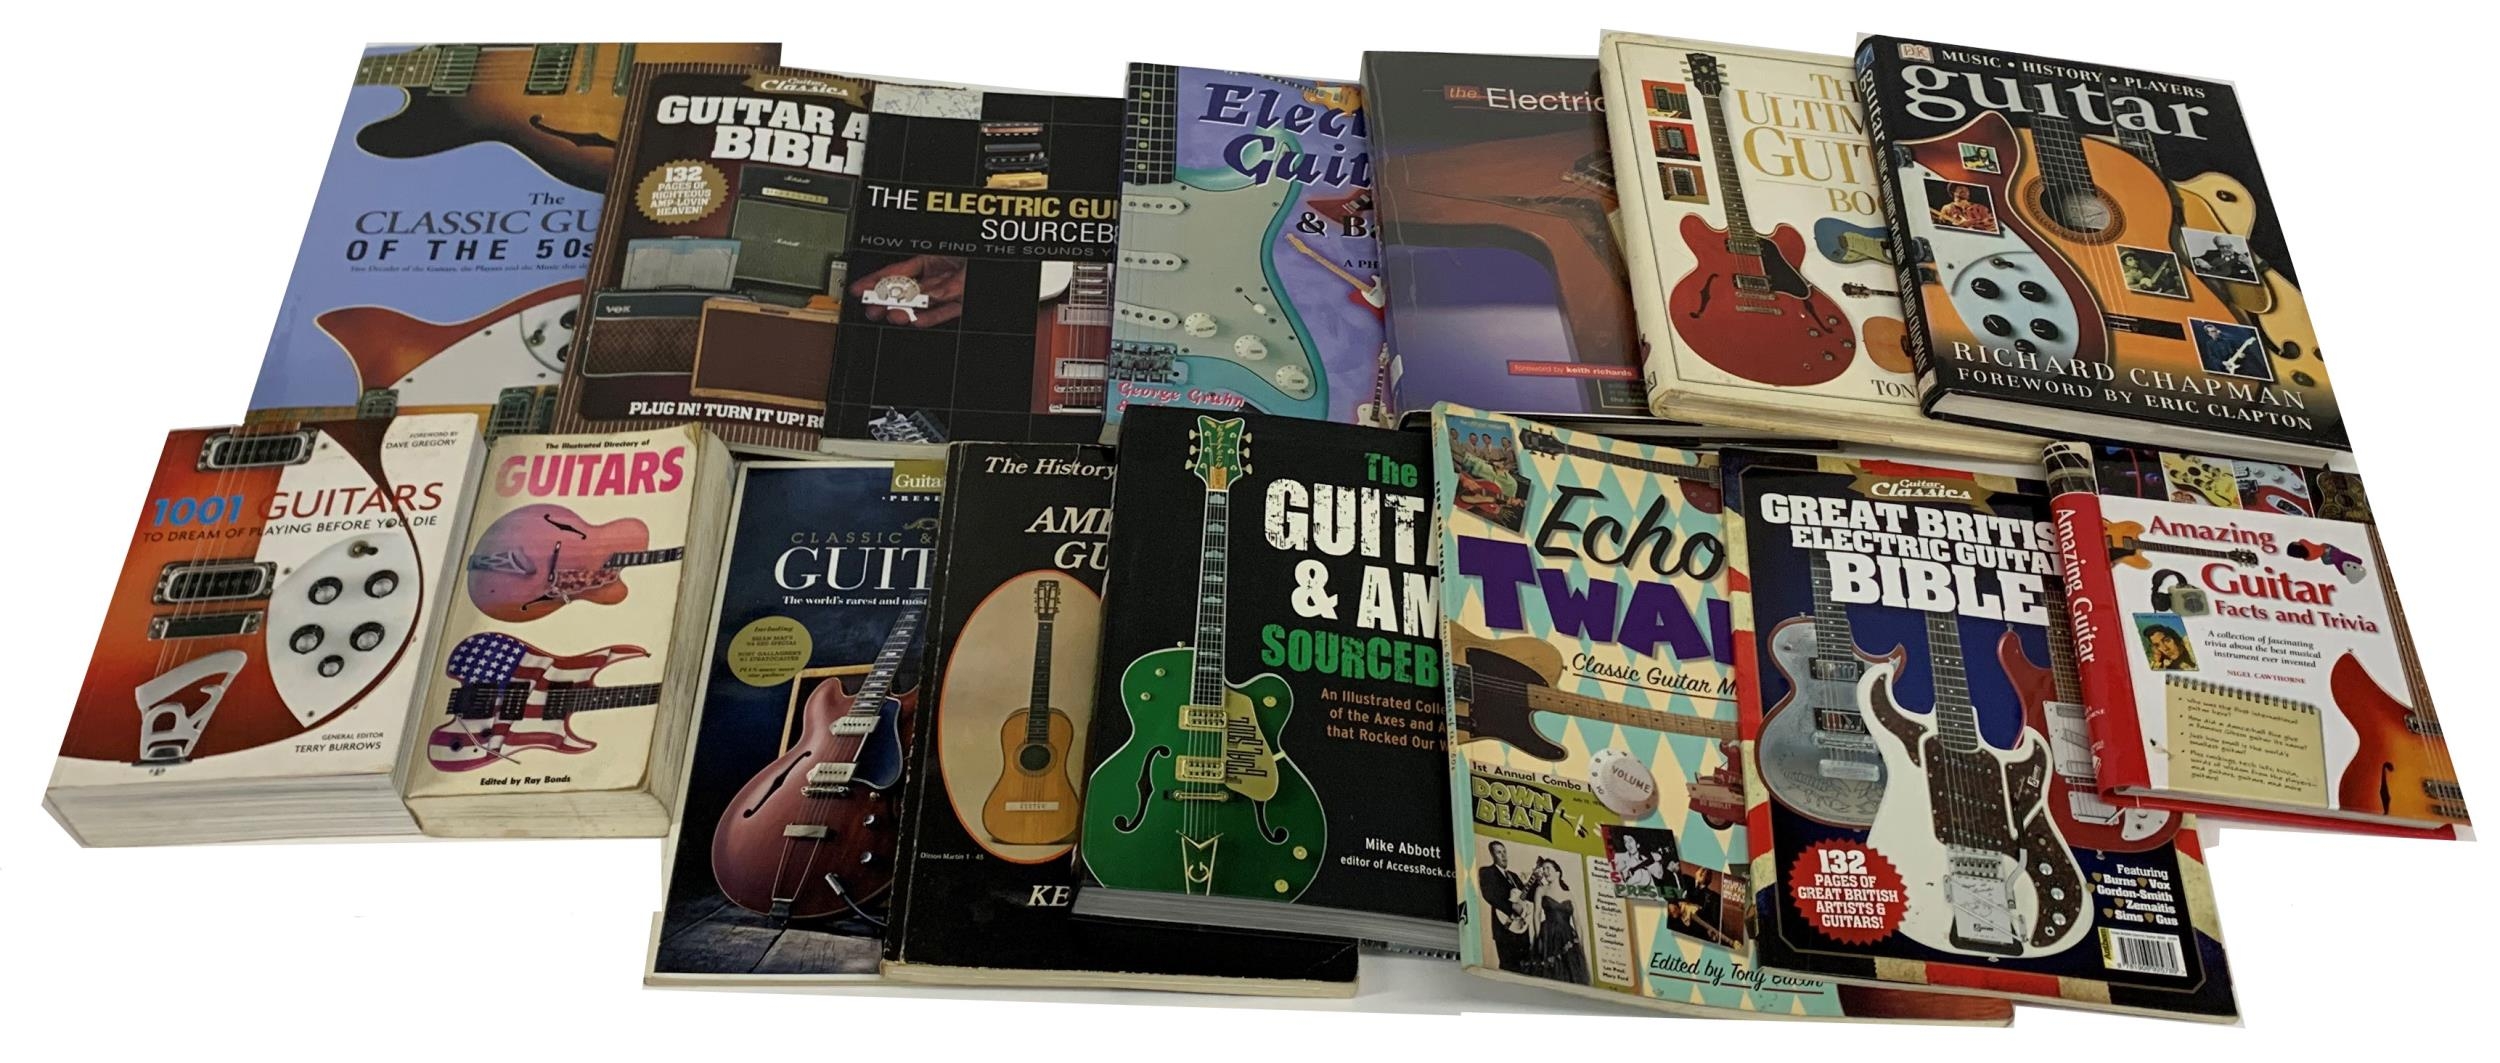 Good selection of well-known encyclopaedic and other guitar reference books